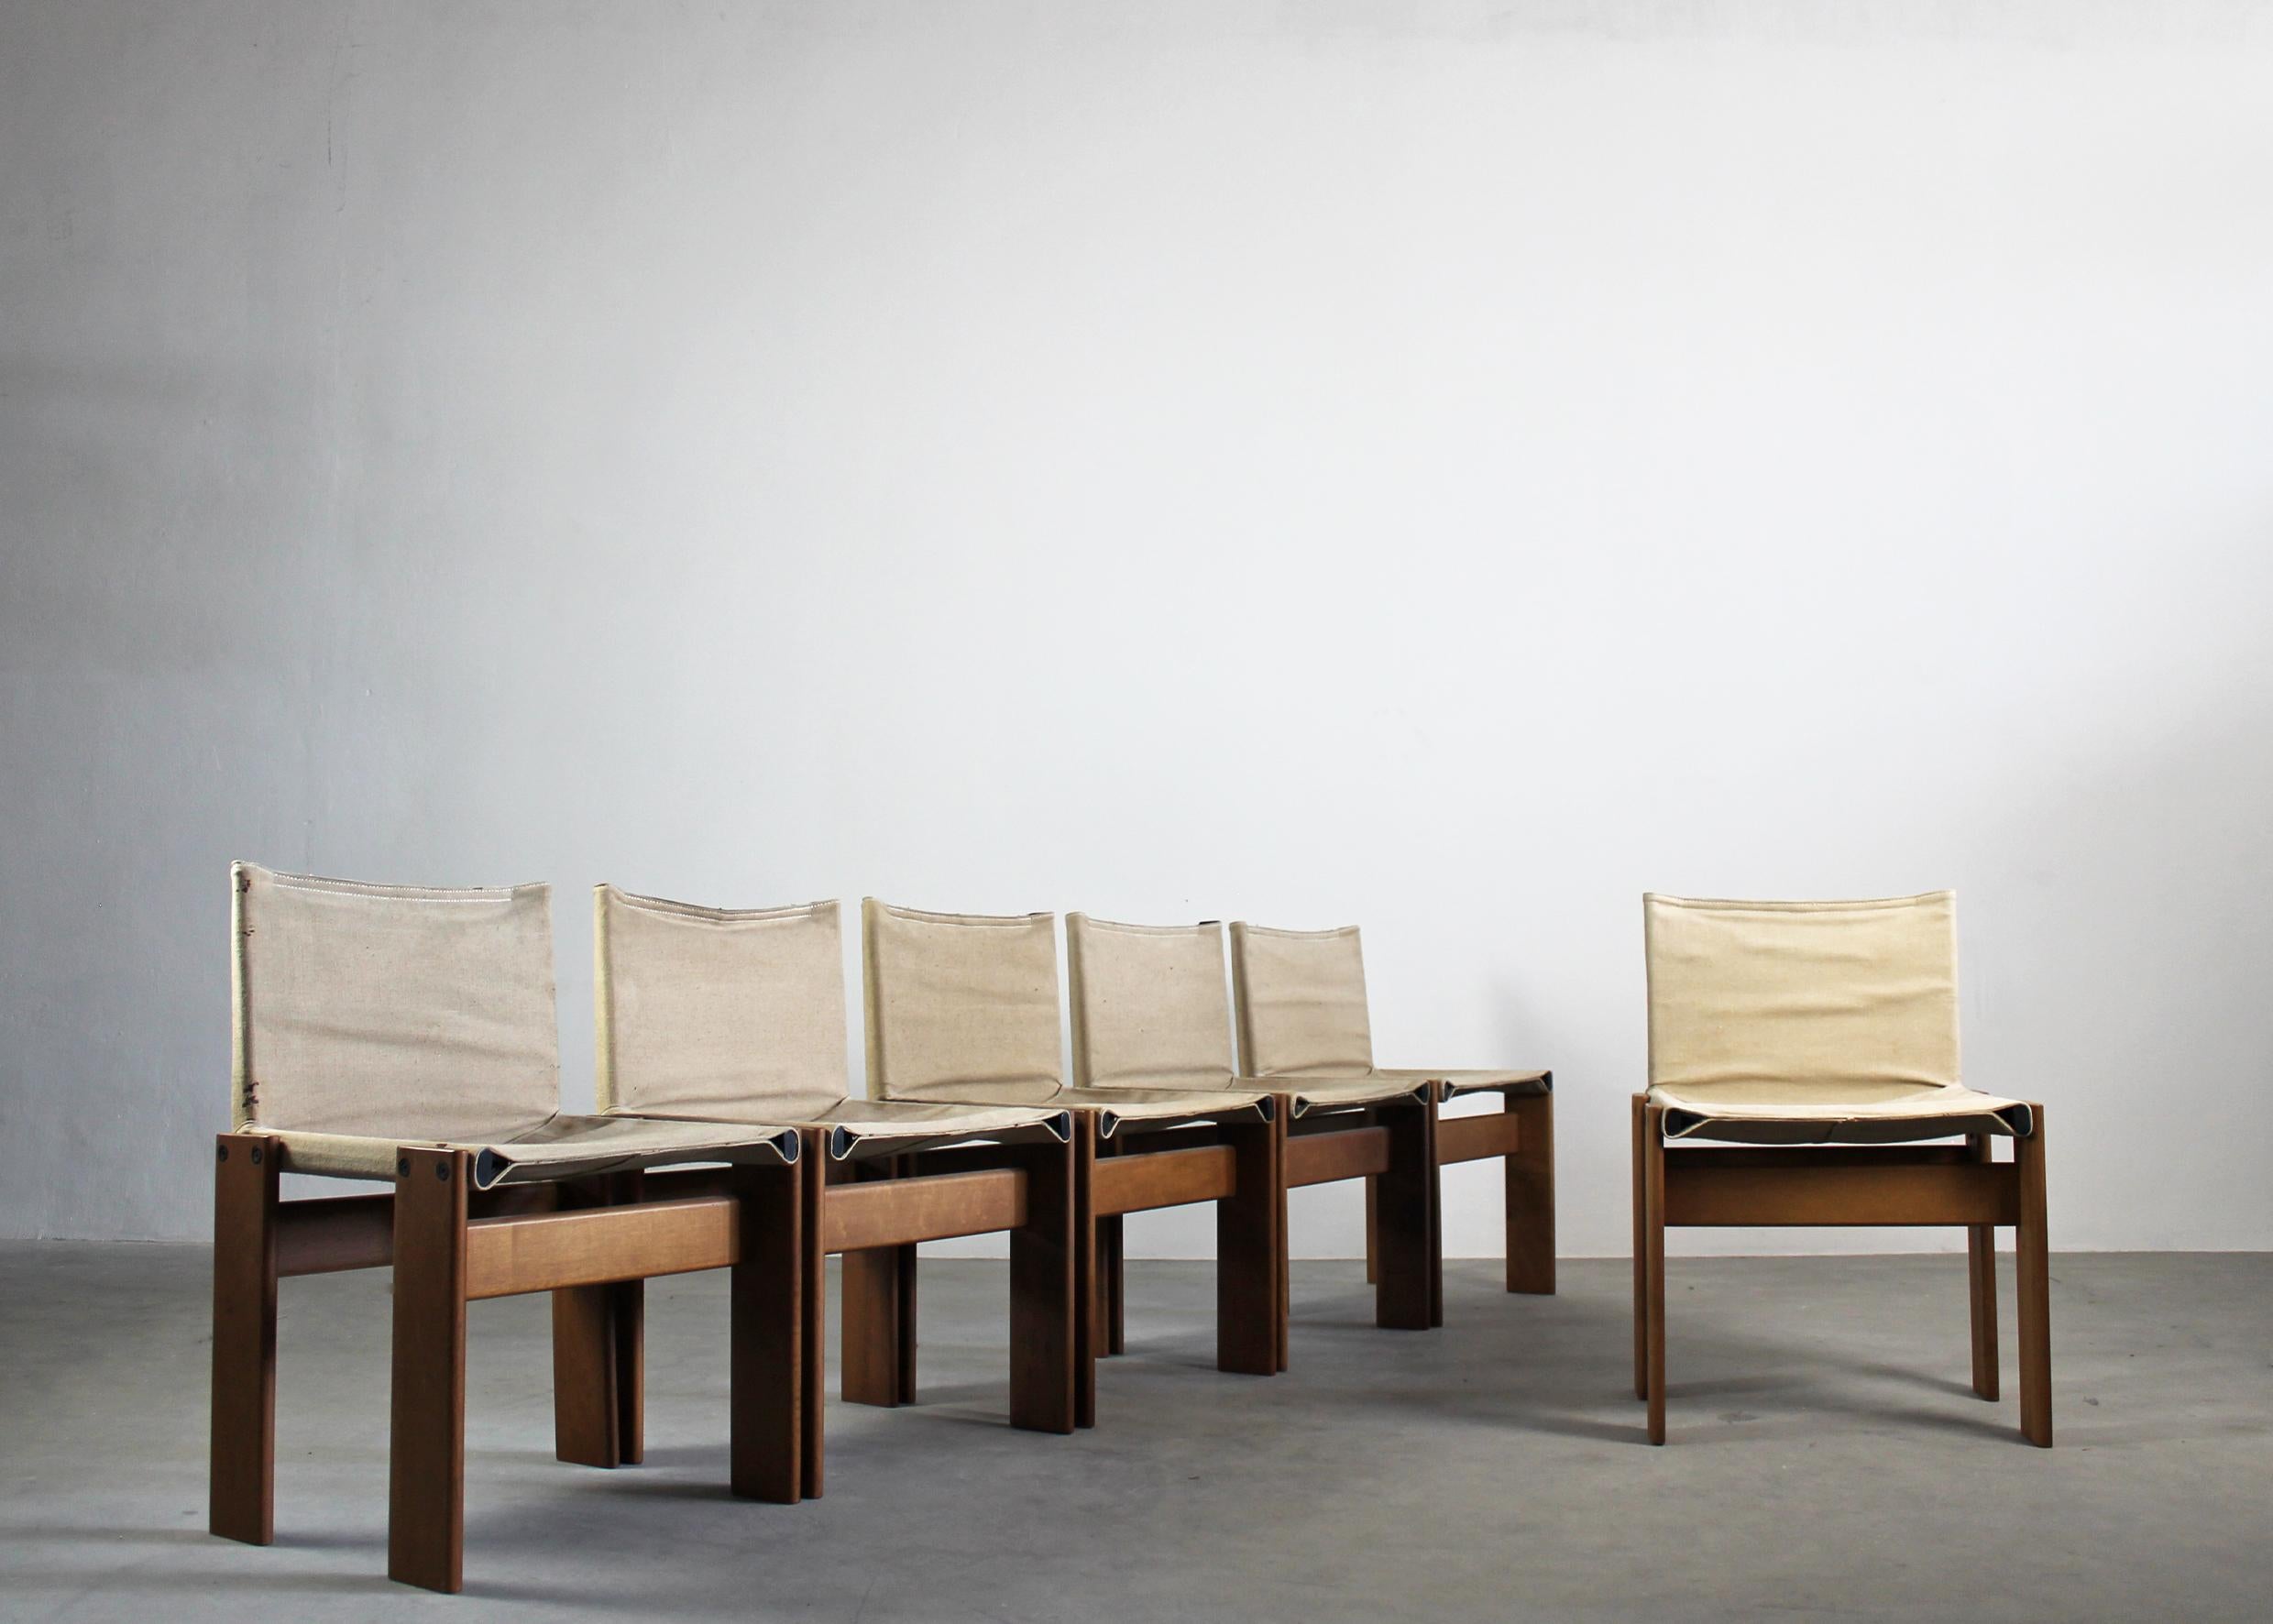 Set of six Monk chairs with a structure in walnut wood, the seat, and the back are made of canvas, which is fitted over two tubular steel sections in such a way as to create a very comfortable chair. 
Made from solid wooden planks, the legs support